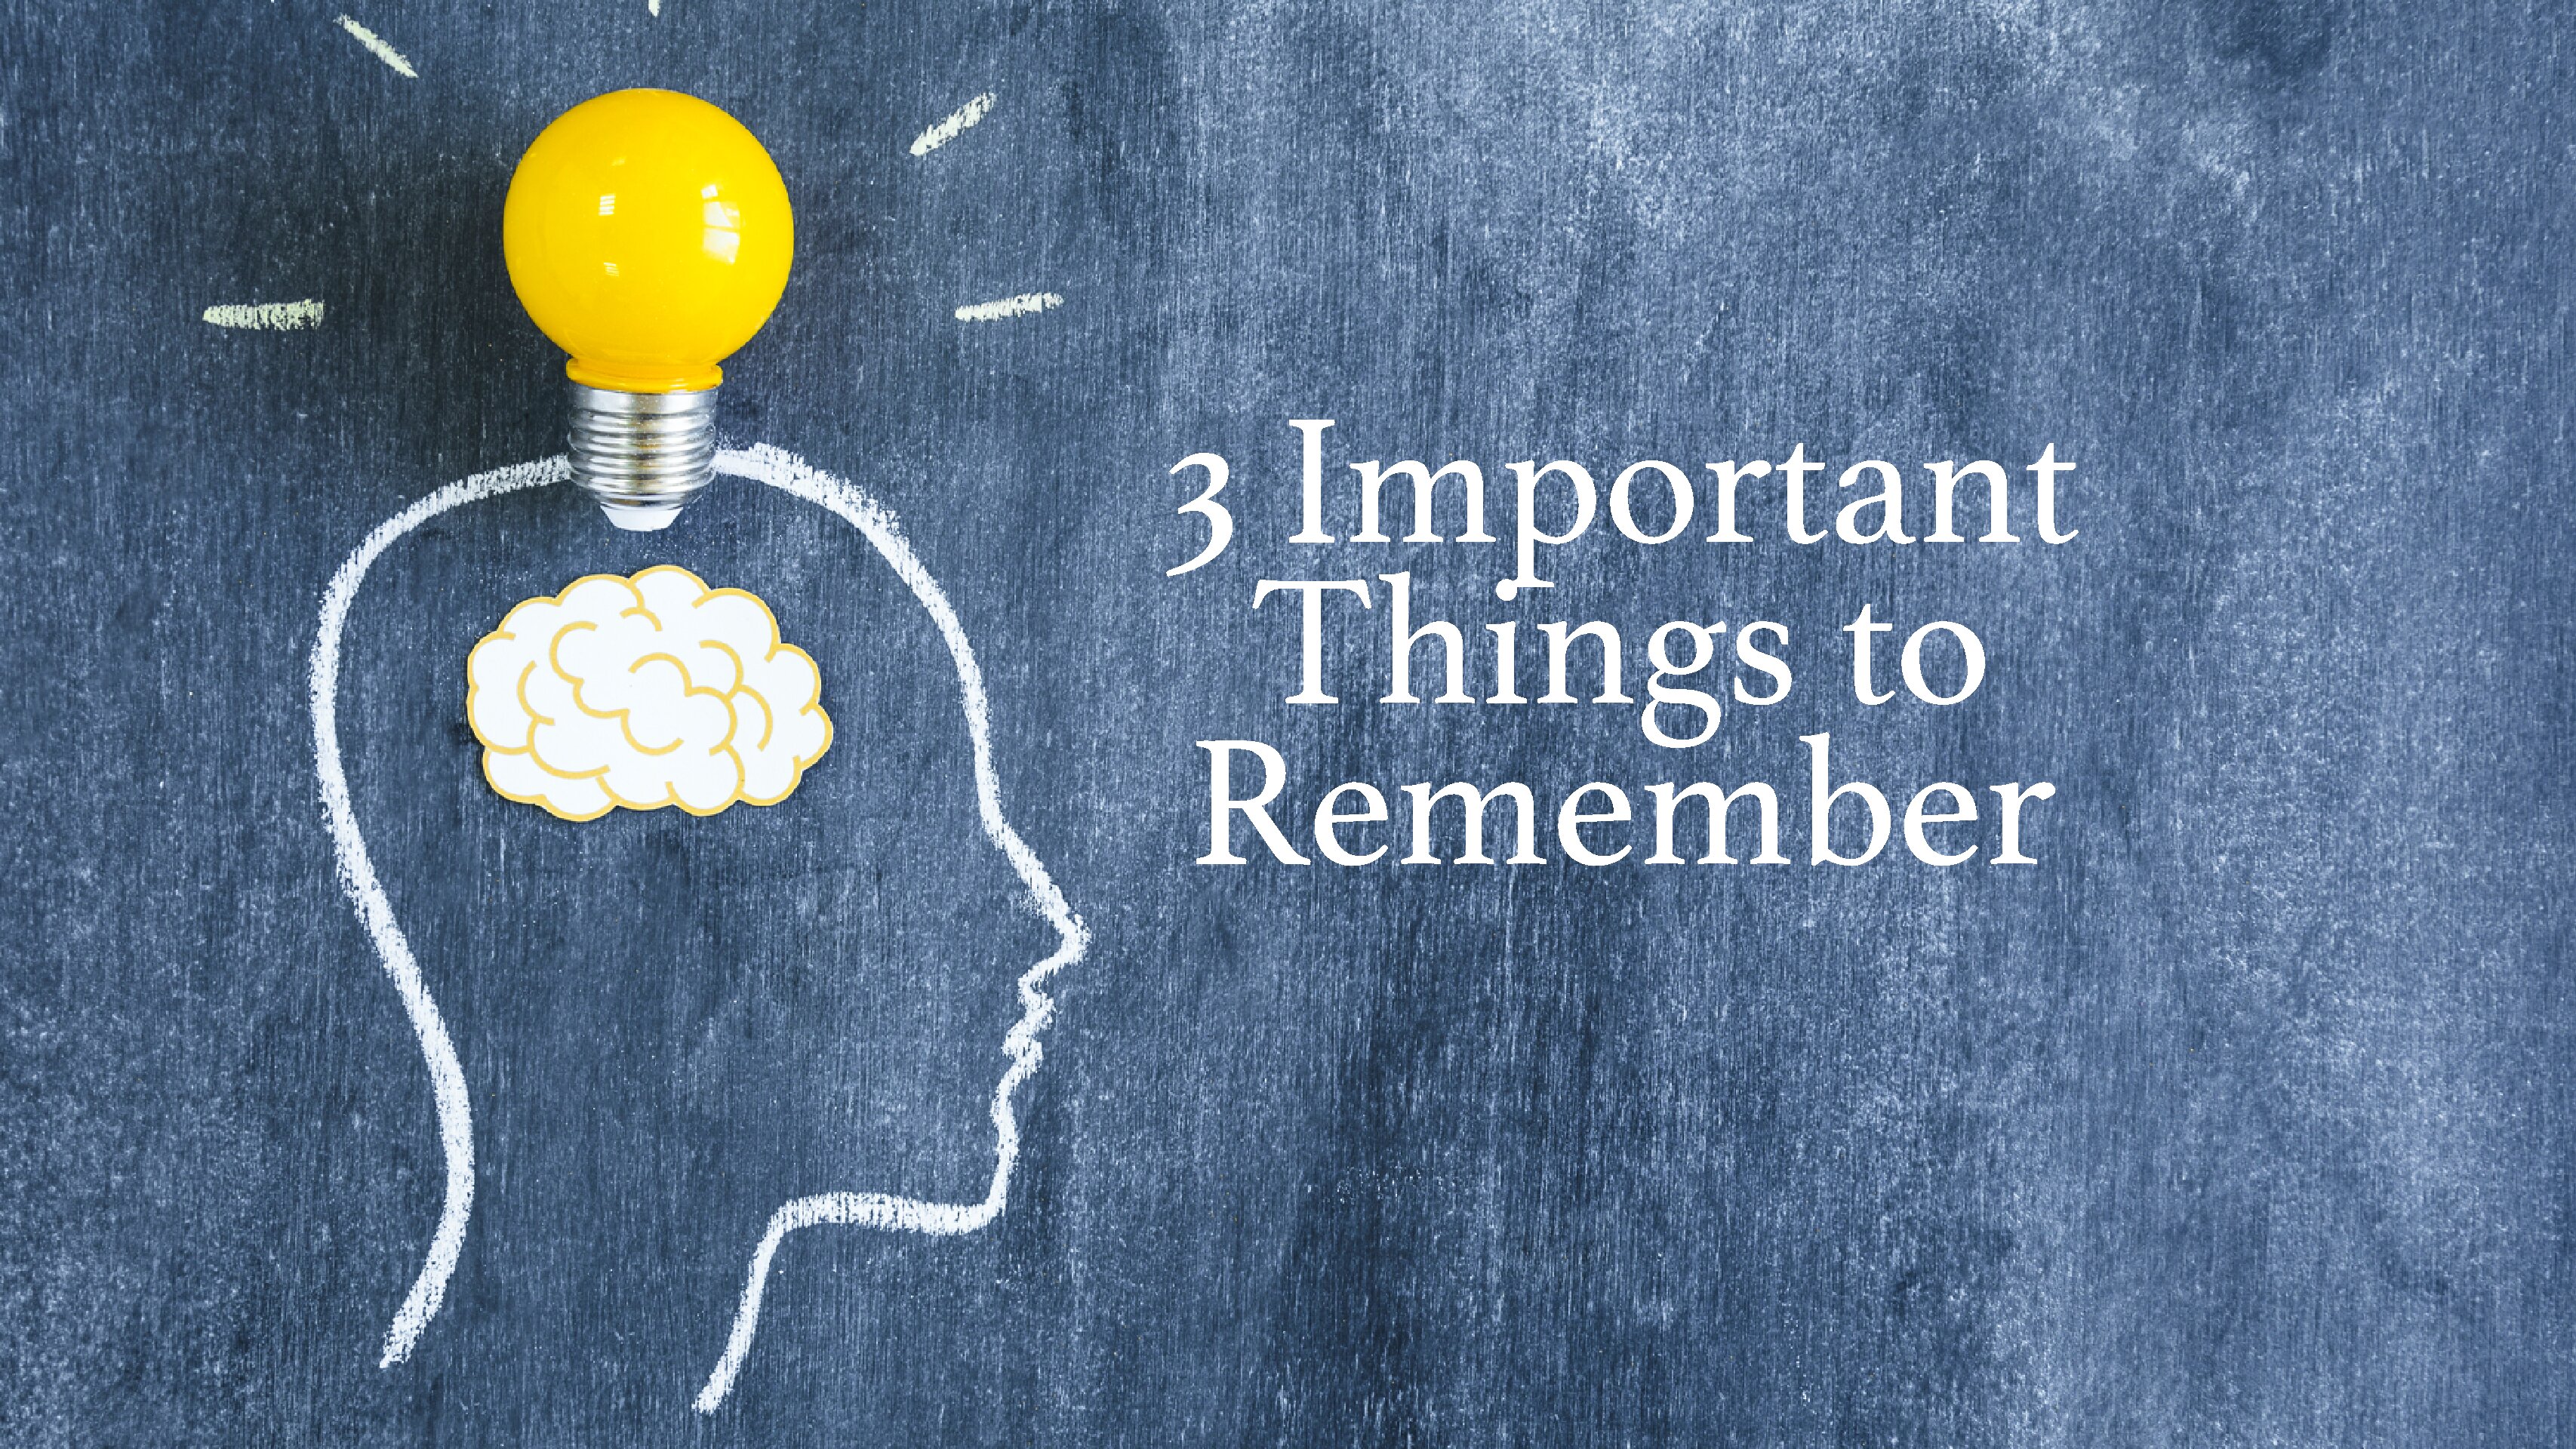 3 Important Things to Remember